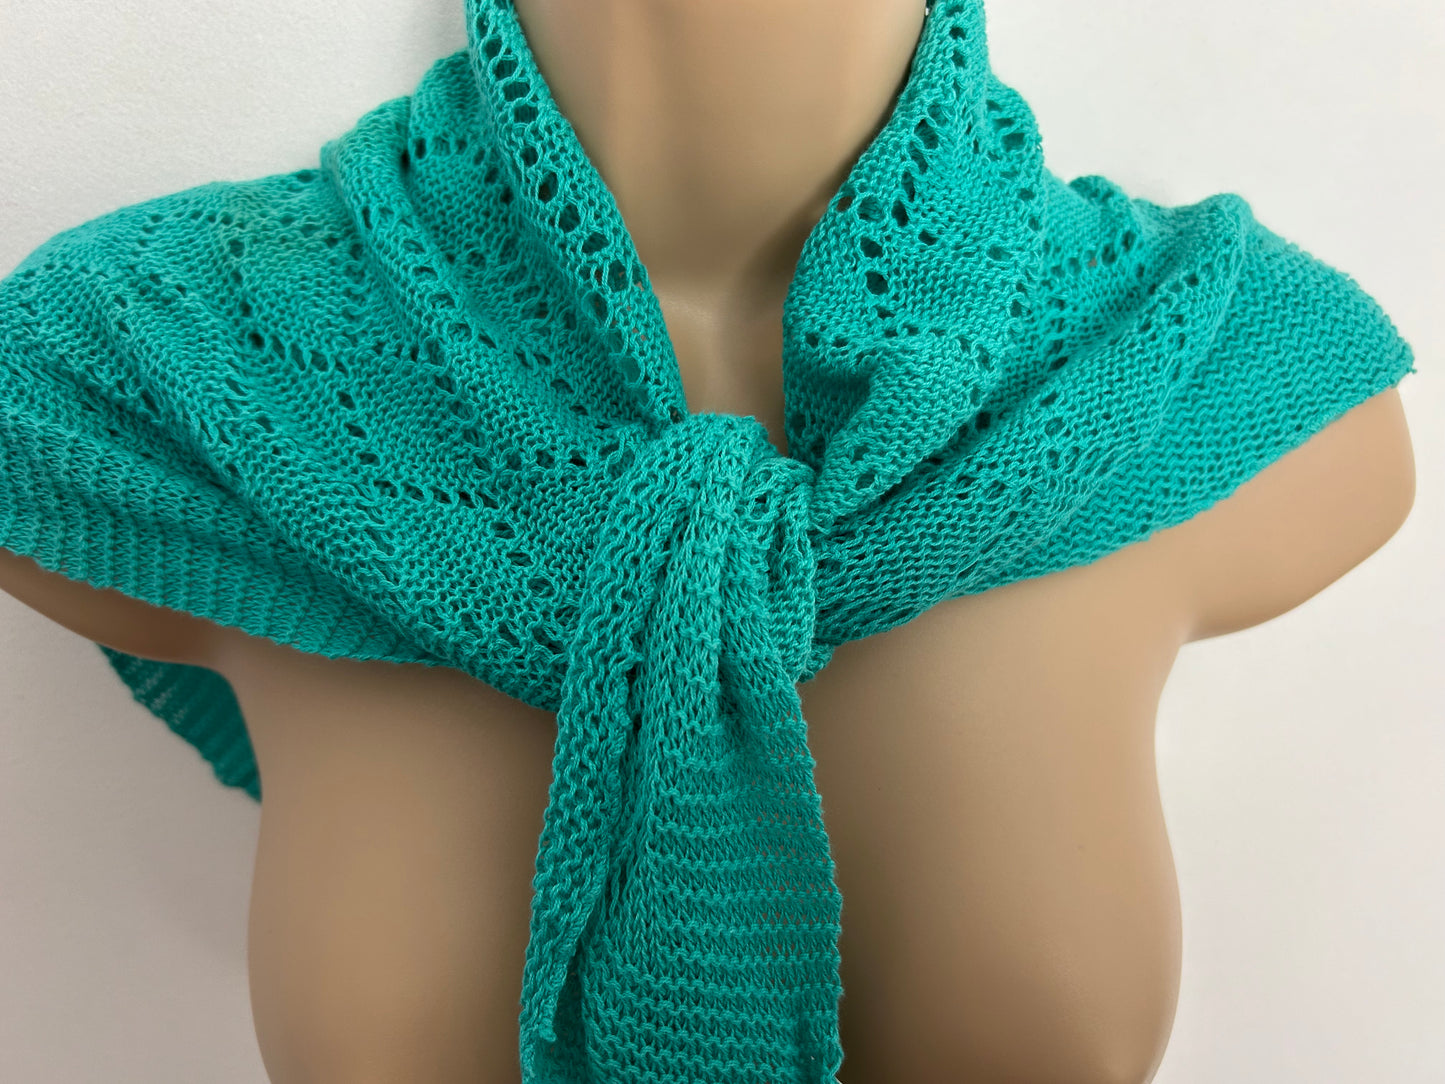 Vintage Late 1980s/1990s LAURA ASHLEY Turquoise 100% Cotton Crochet Neck Scarf